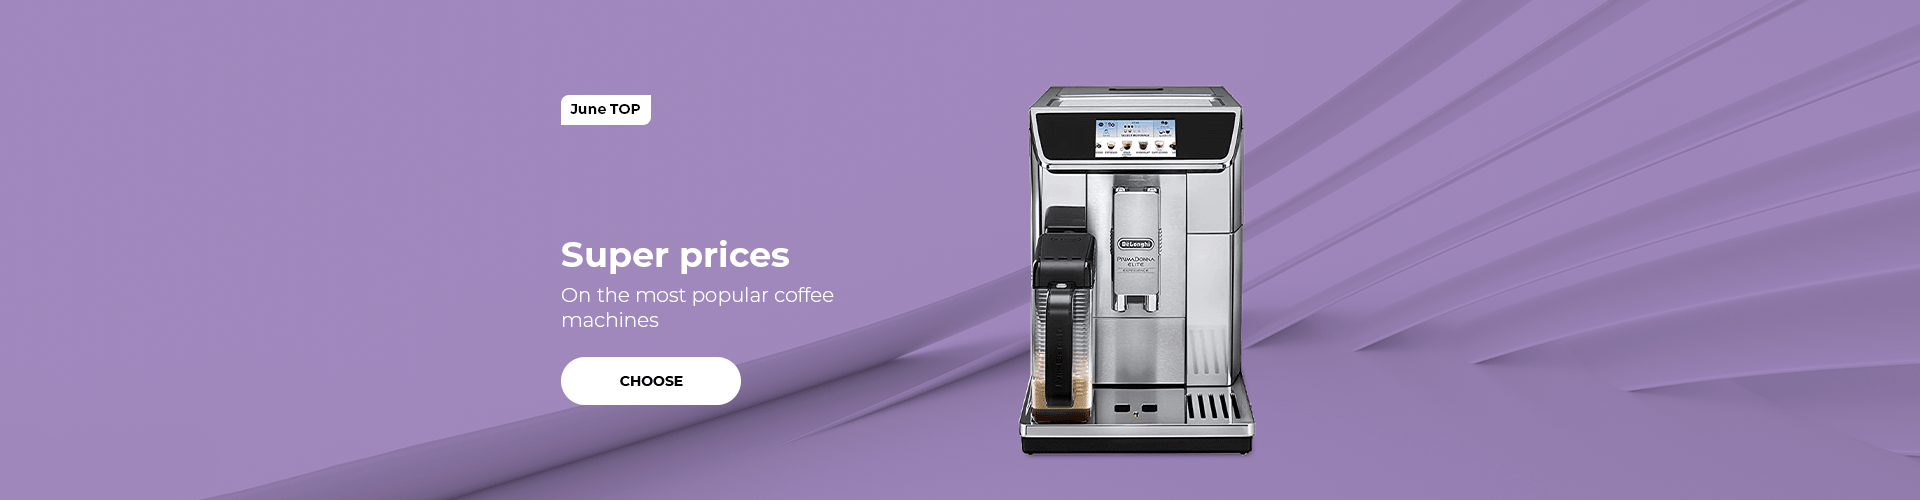 Super prices on the most popular coffee machines